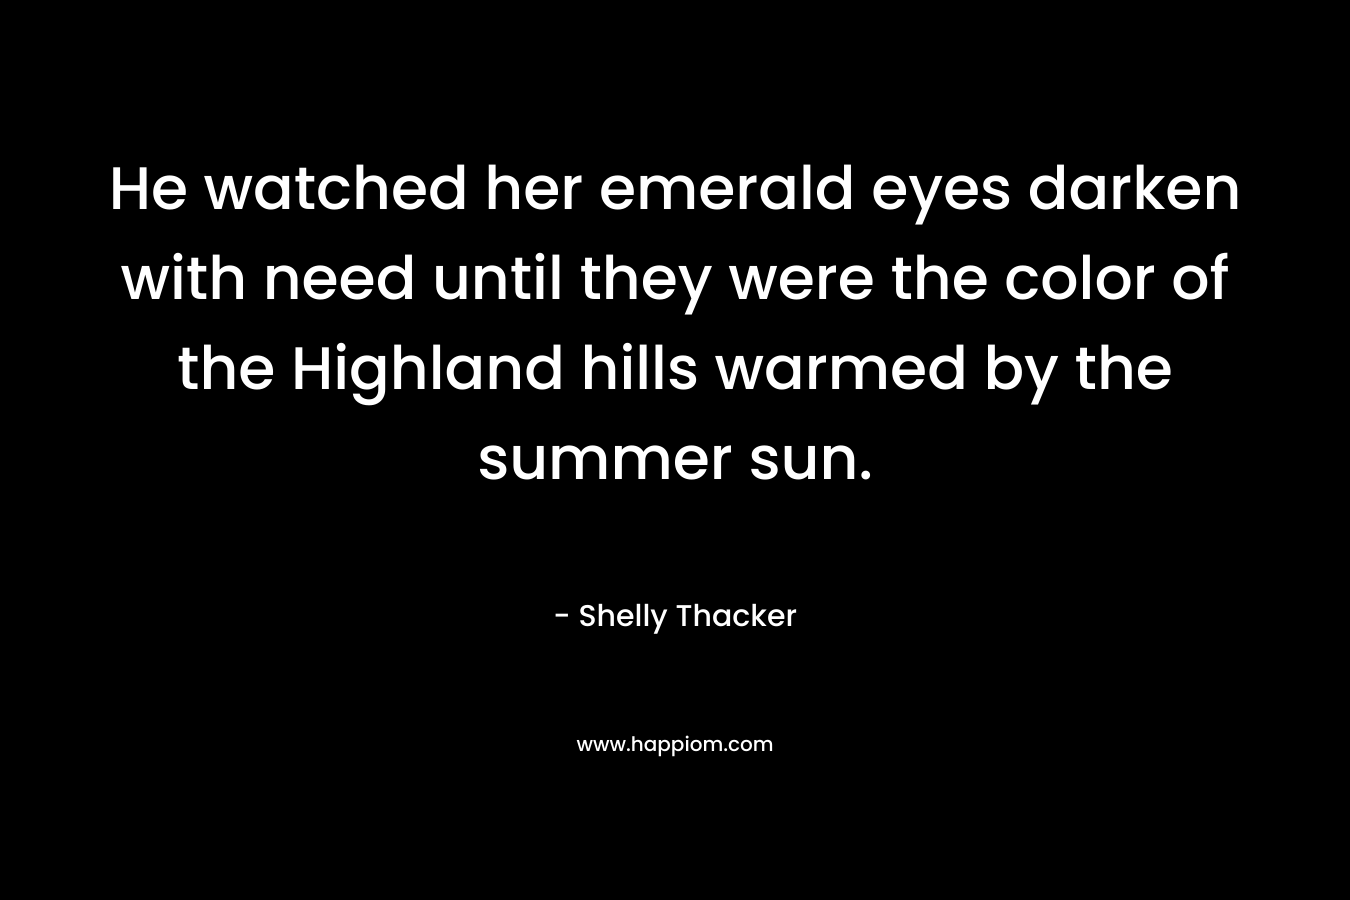 He watched her emerald eyes darken with need until they were the color of the Highland hills warmed by the summer sun. – Shelly Thacker